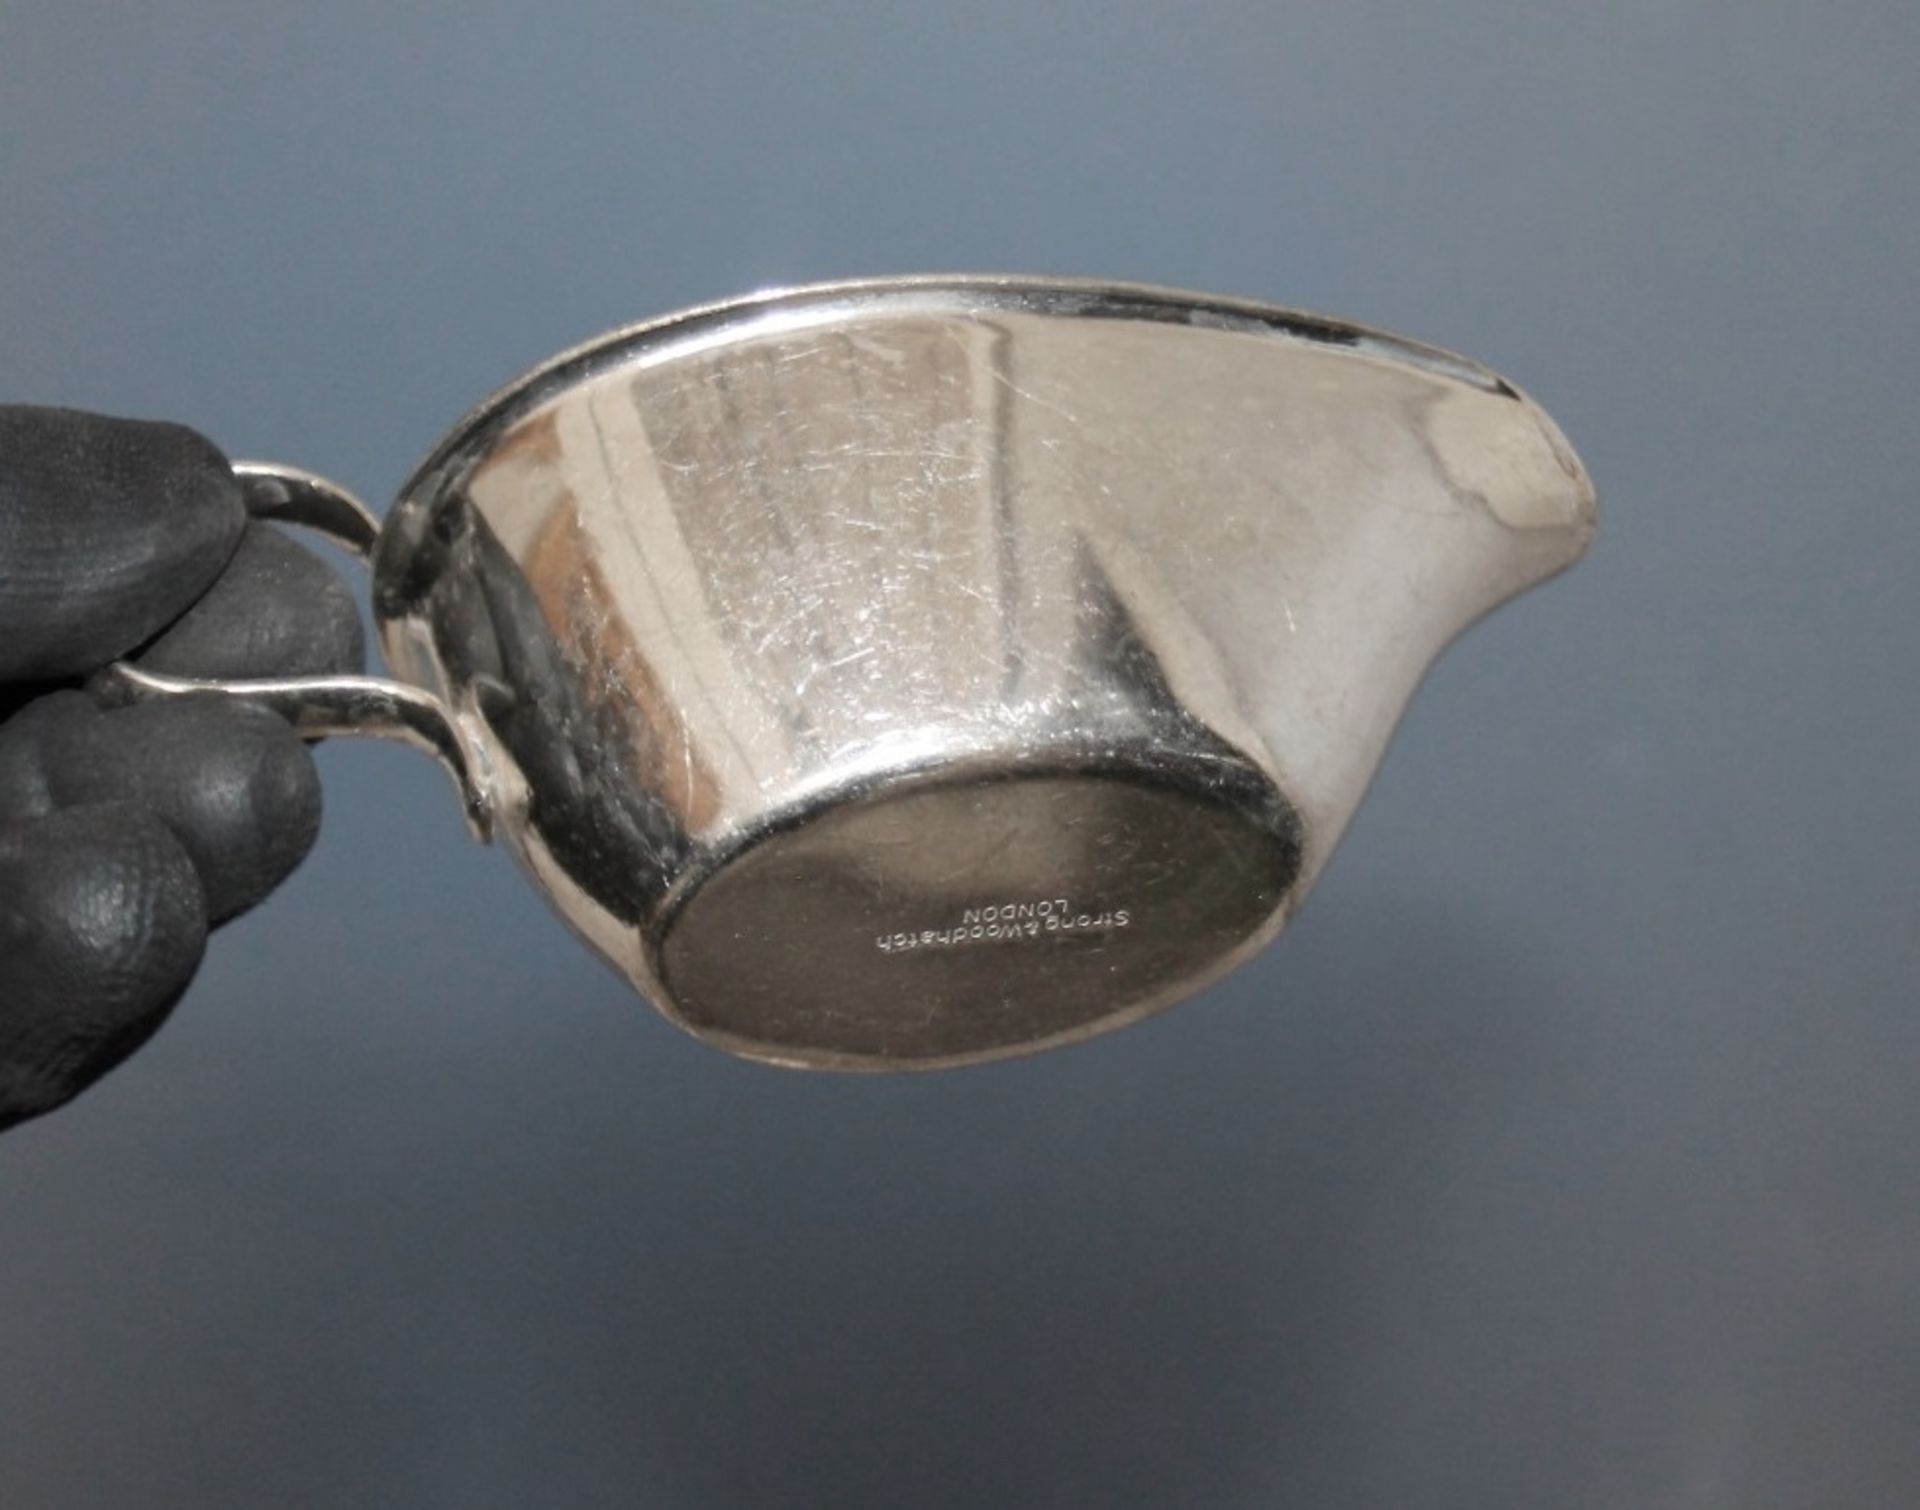 30 x Assorted Silver-Plated Sauce Boats - The Majority Strong and Woodhatch Branded - Recently - Image 4 of 8